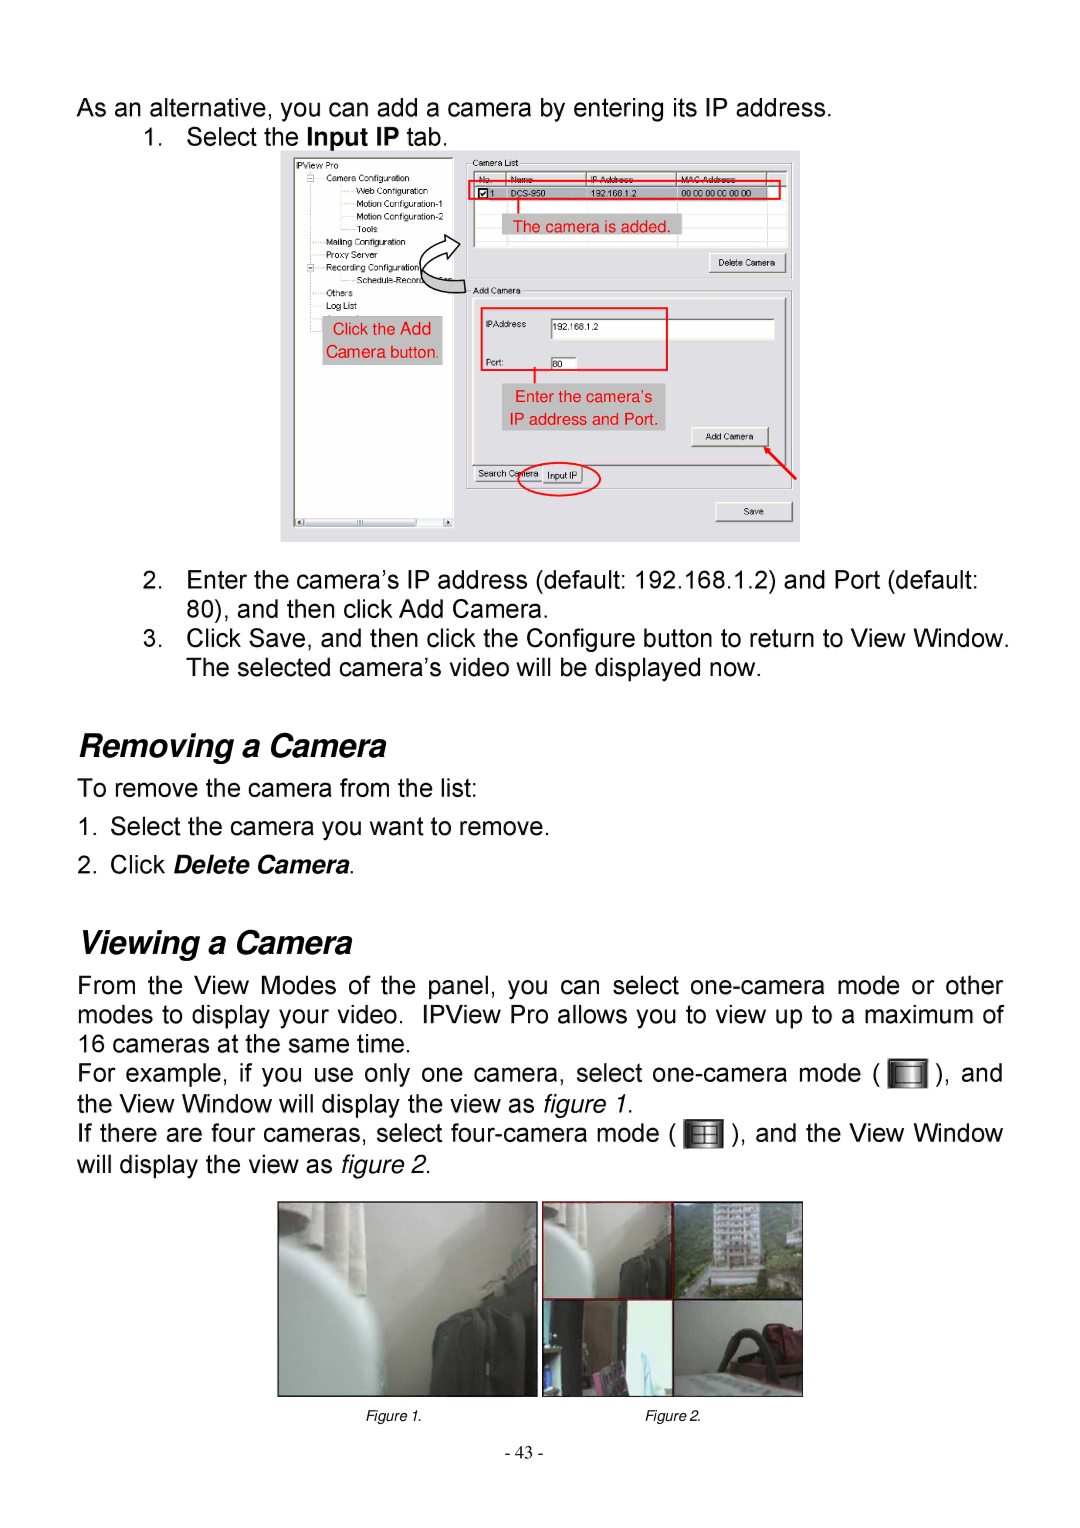 MicroNet Technology SP5530 user manual Removing a Camera, Viewing a Camera 